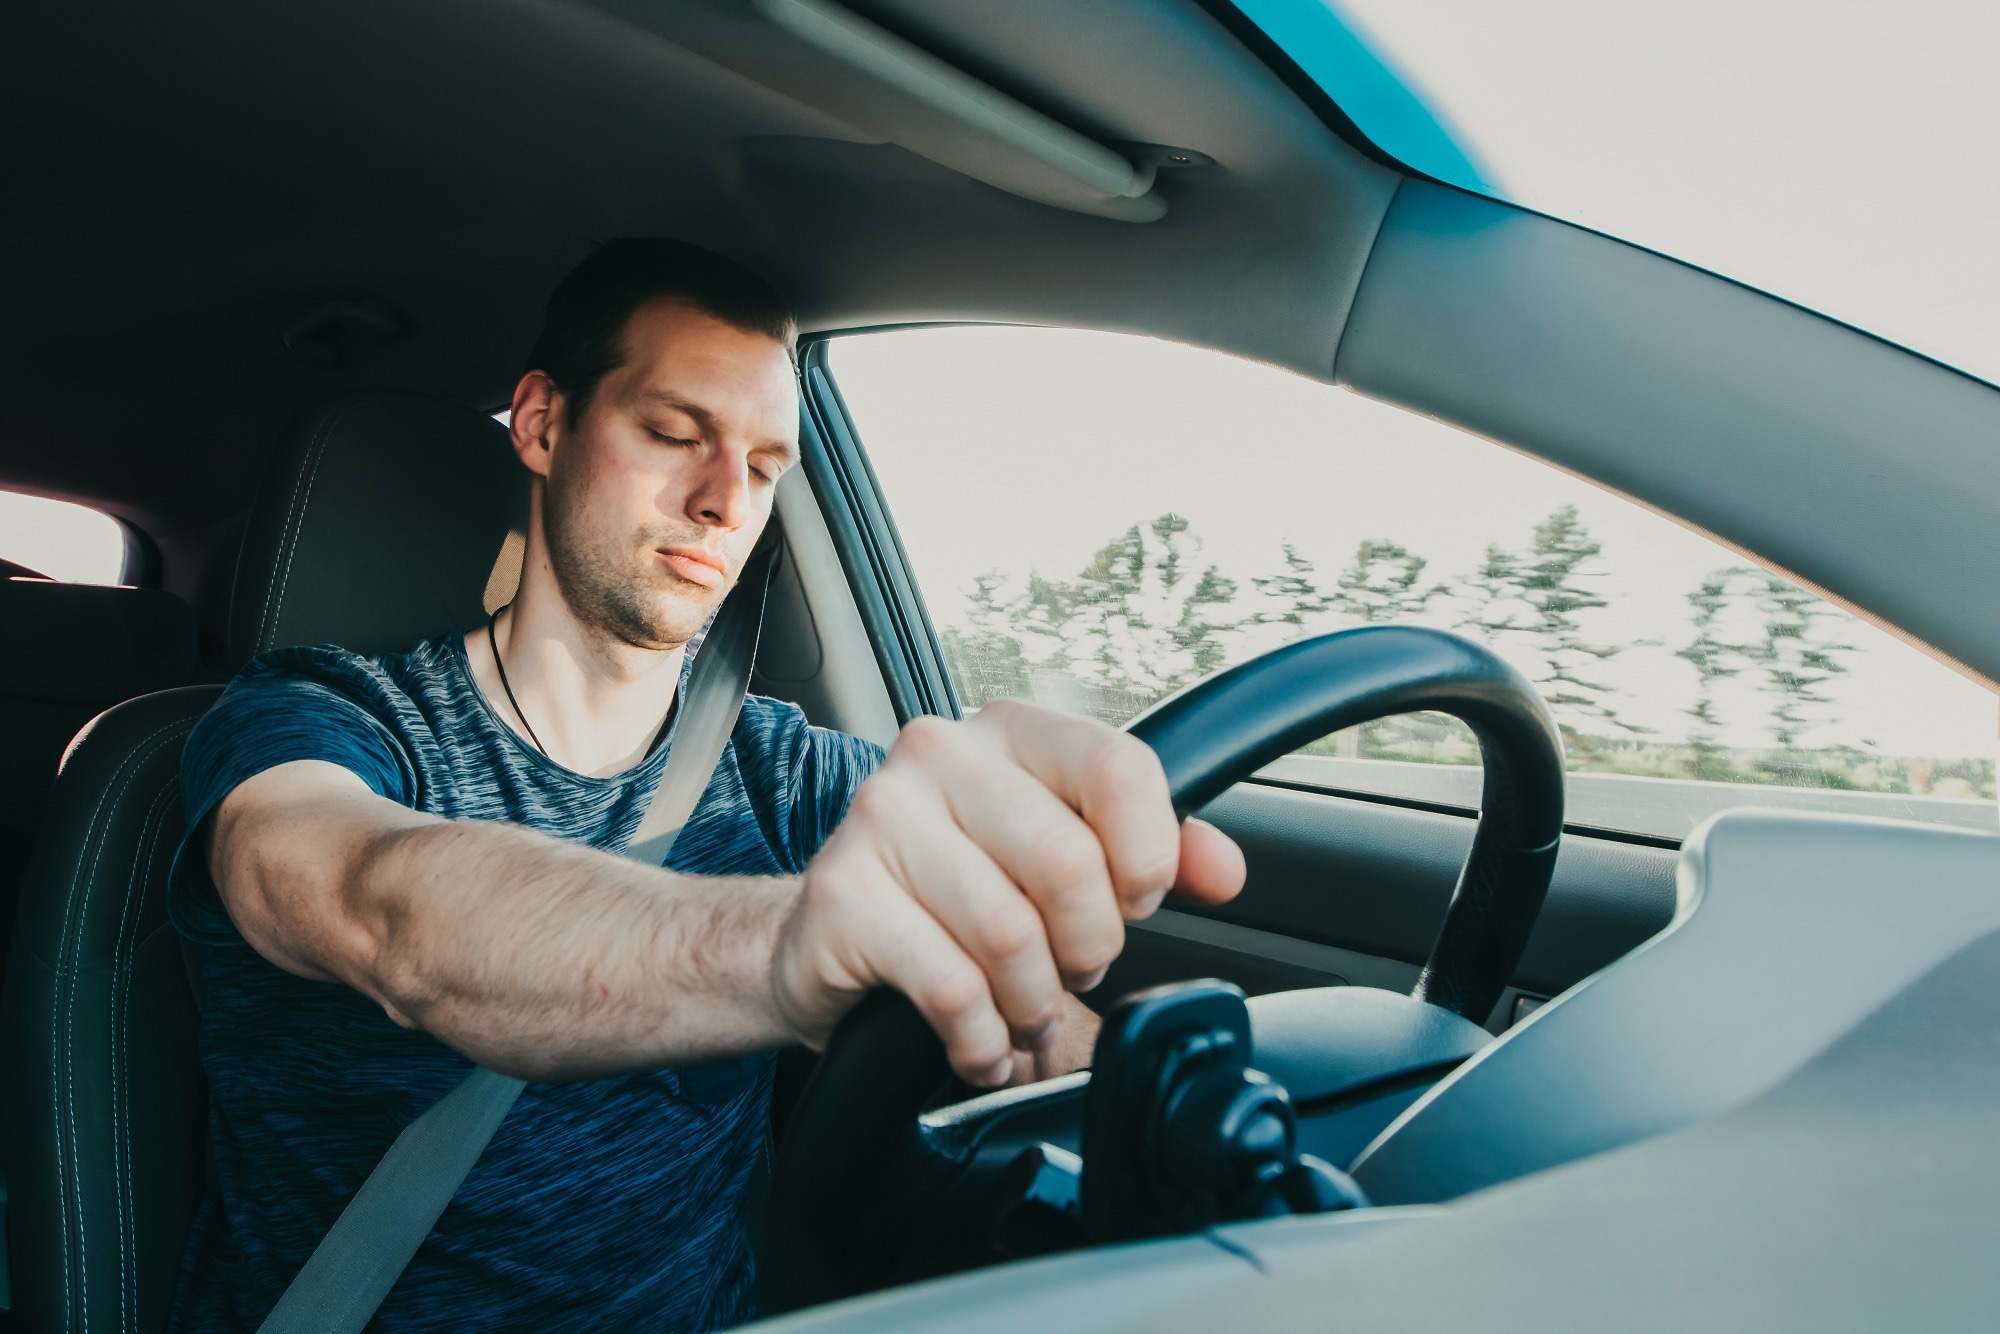 Study: Risk perceptions of driving under the influence of cannabis: Comparing medical and non-medical cannabis users. Image Credit: rbkomar / Shutterstock